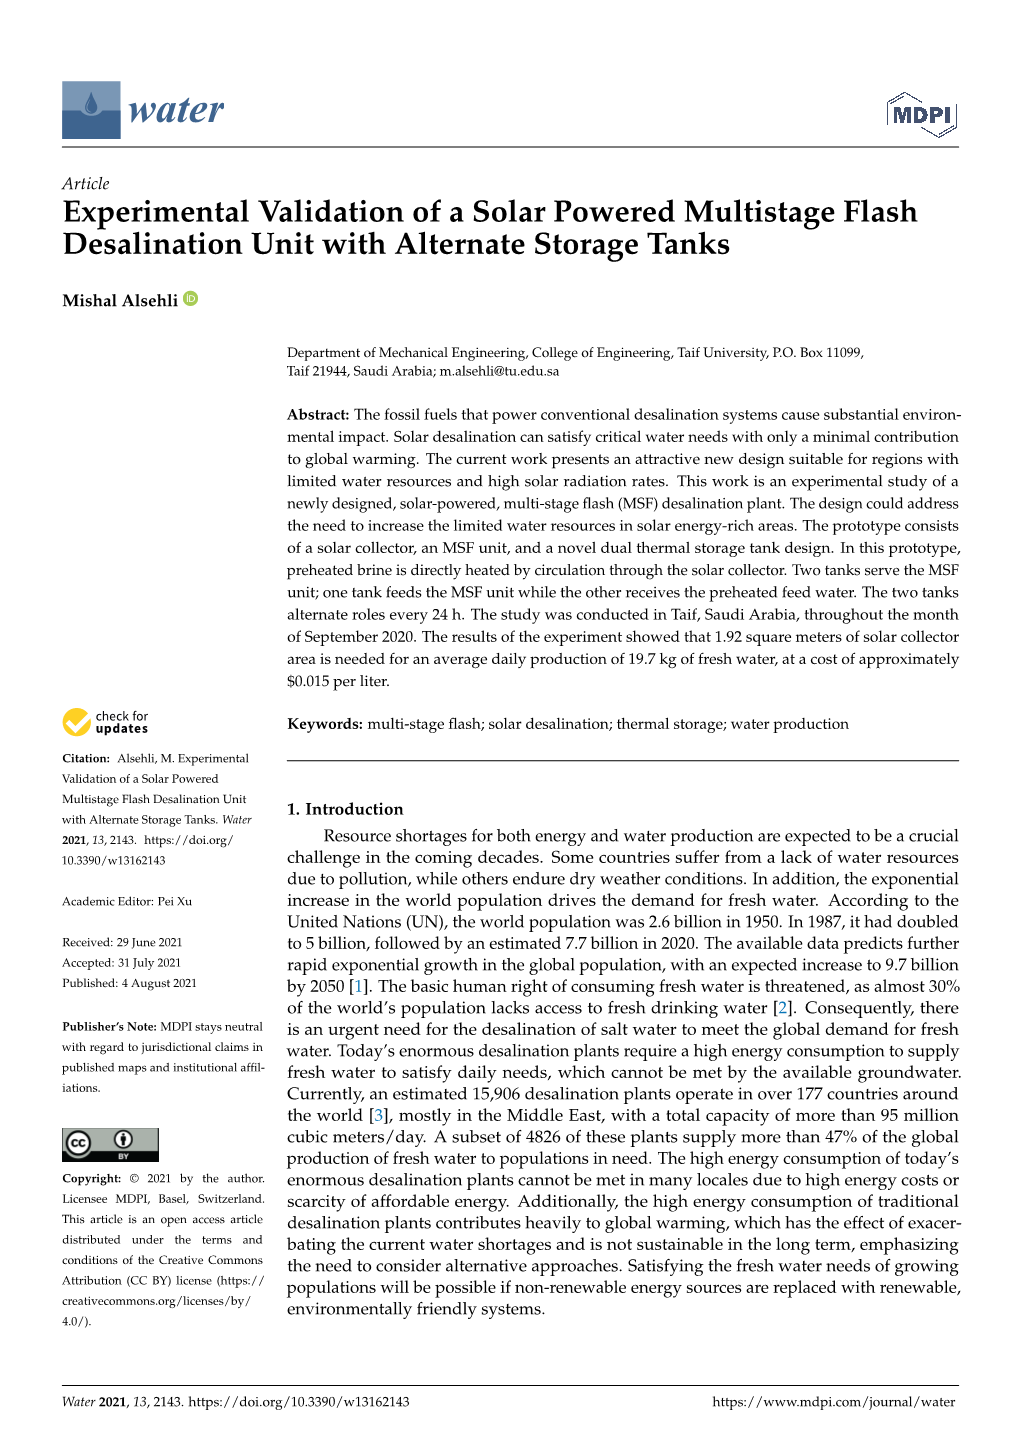 Experimental Validation of a Solar Powered Multistage Flash Desalination Unit with Alternate Storage Tanks